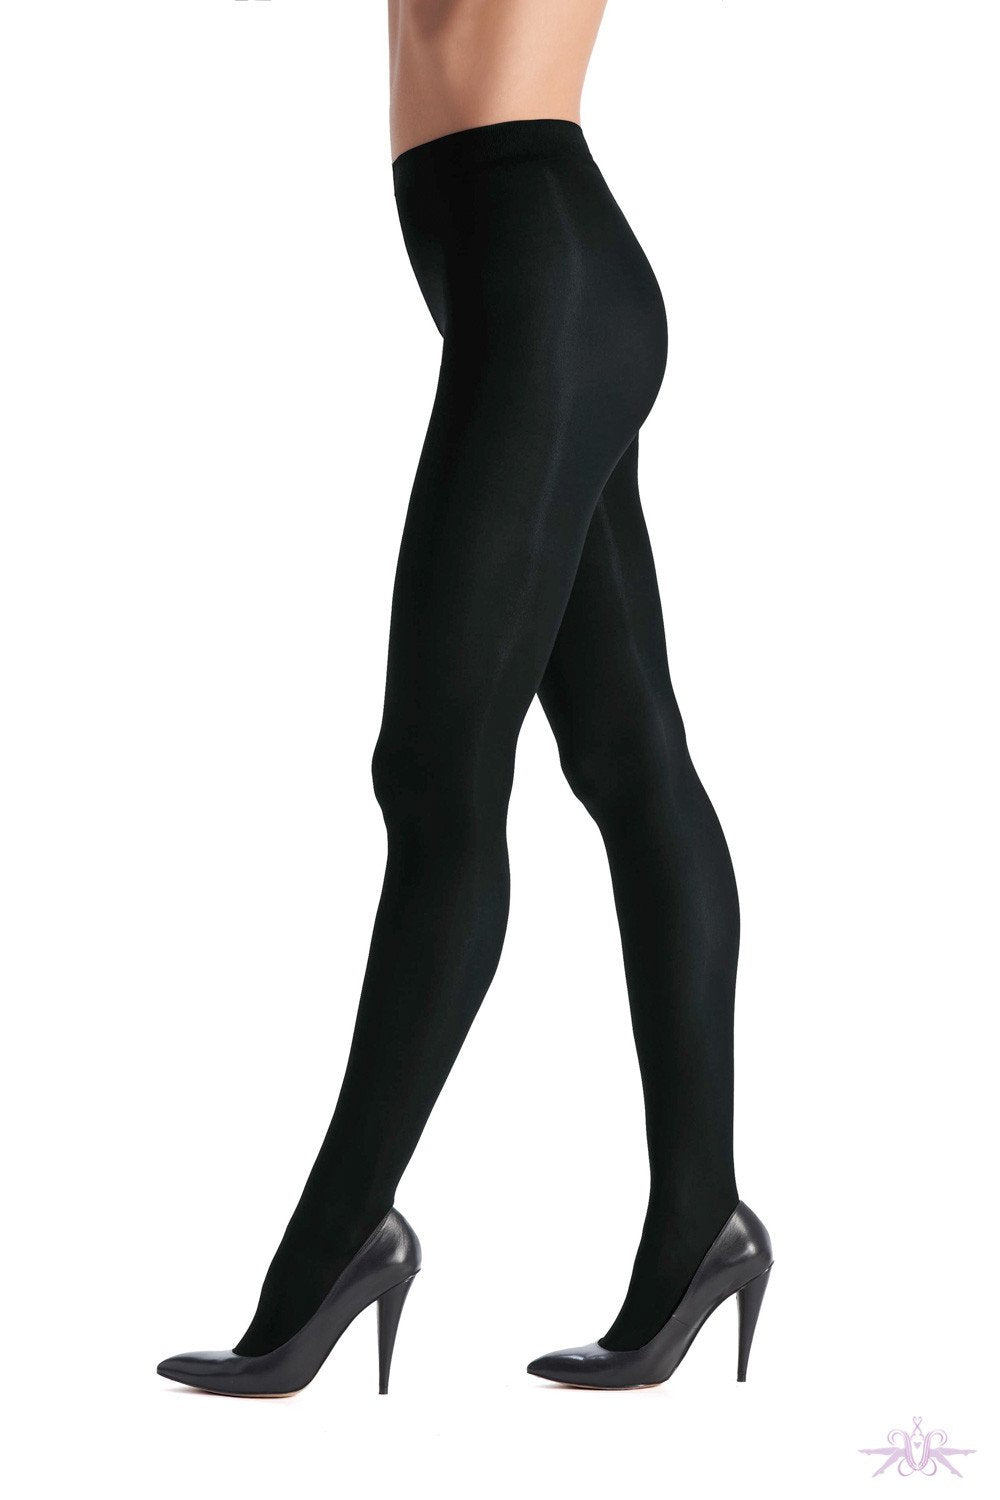 Oroblu All Colours 50 Opaque Tight - The Hosiery Box